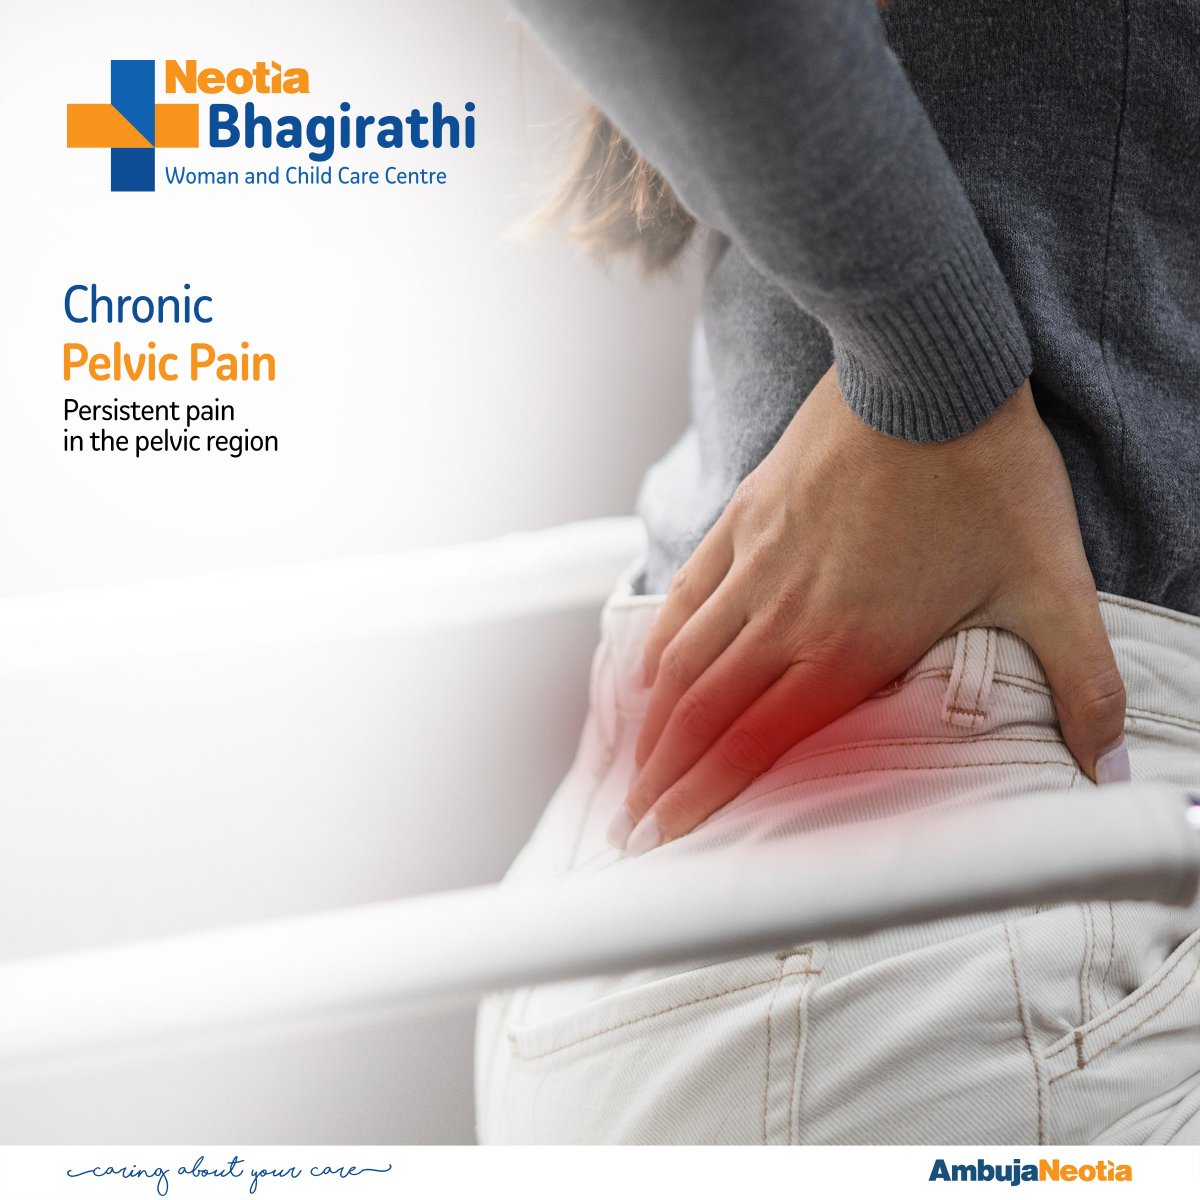 Chronic pelvic pain: a silent #struggle affecting millions worldwide. It's more than just #physical #discomfort; it disrupts daily life, relationships and mental health. Consult your doctor. #chronicpelvicpain #pain #consultation #caringaboutyourcare #ambujaneotia